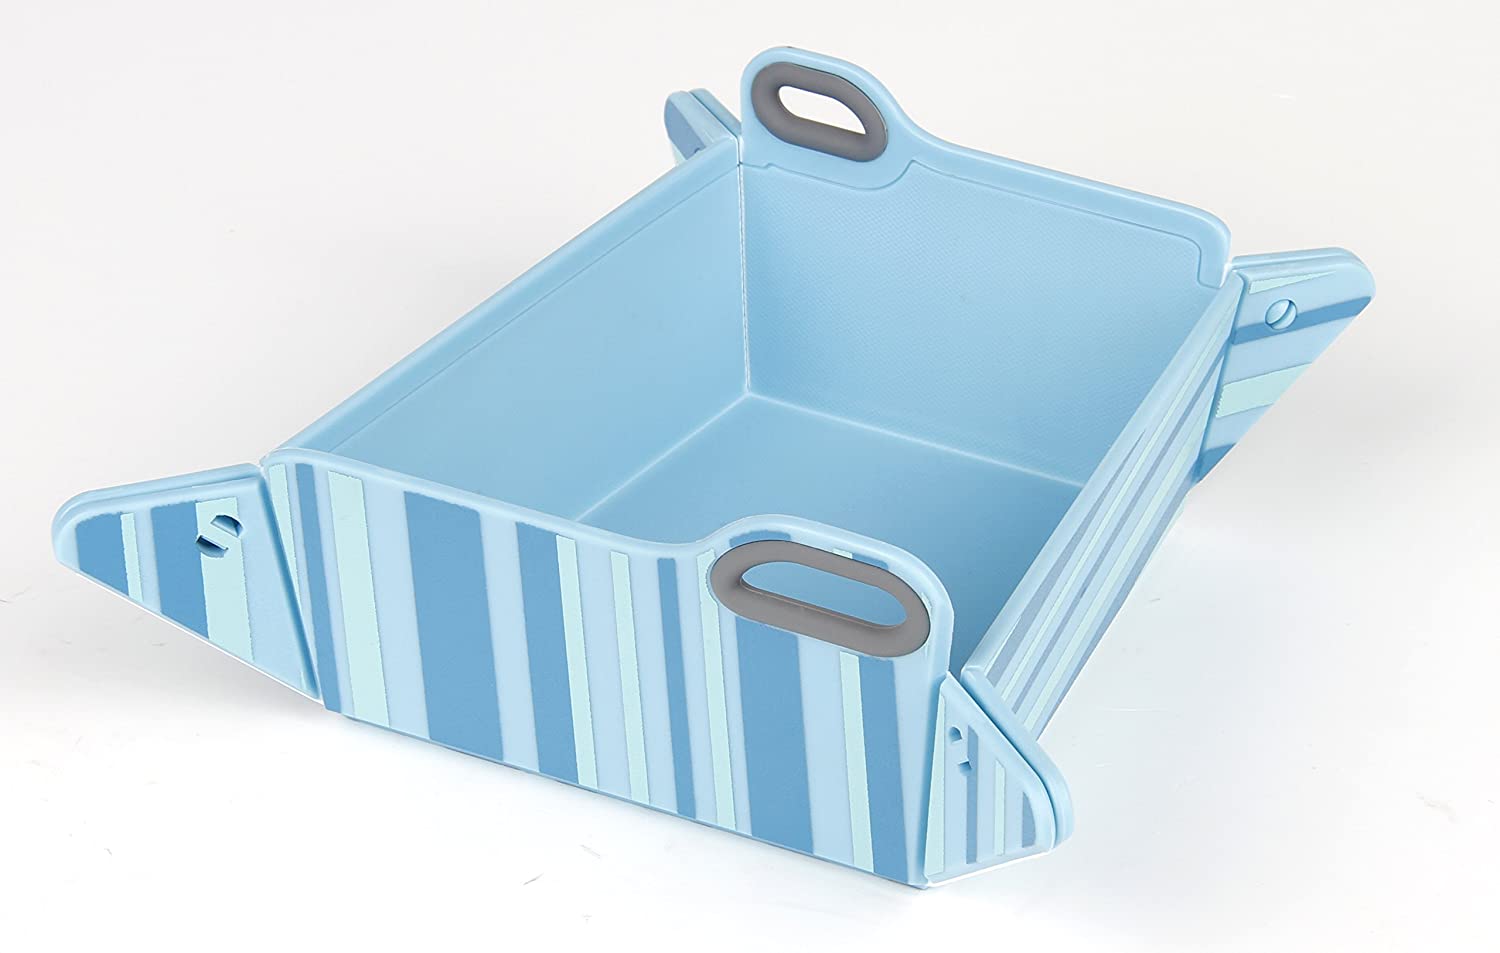 Blue Chop2bowl Dog and Cat Travel Collapsible Water and Food Bowl Snap on Chopping Board